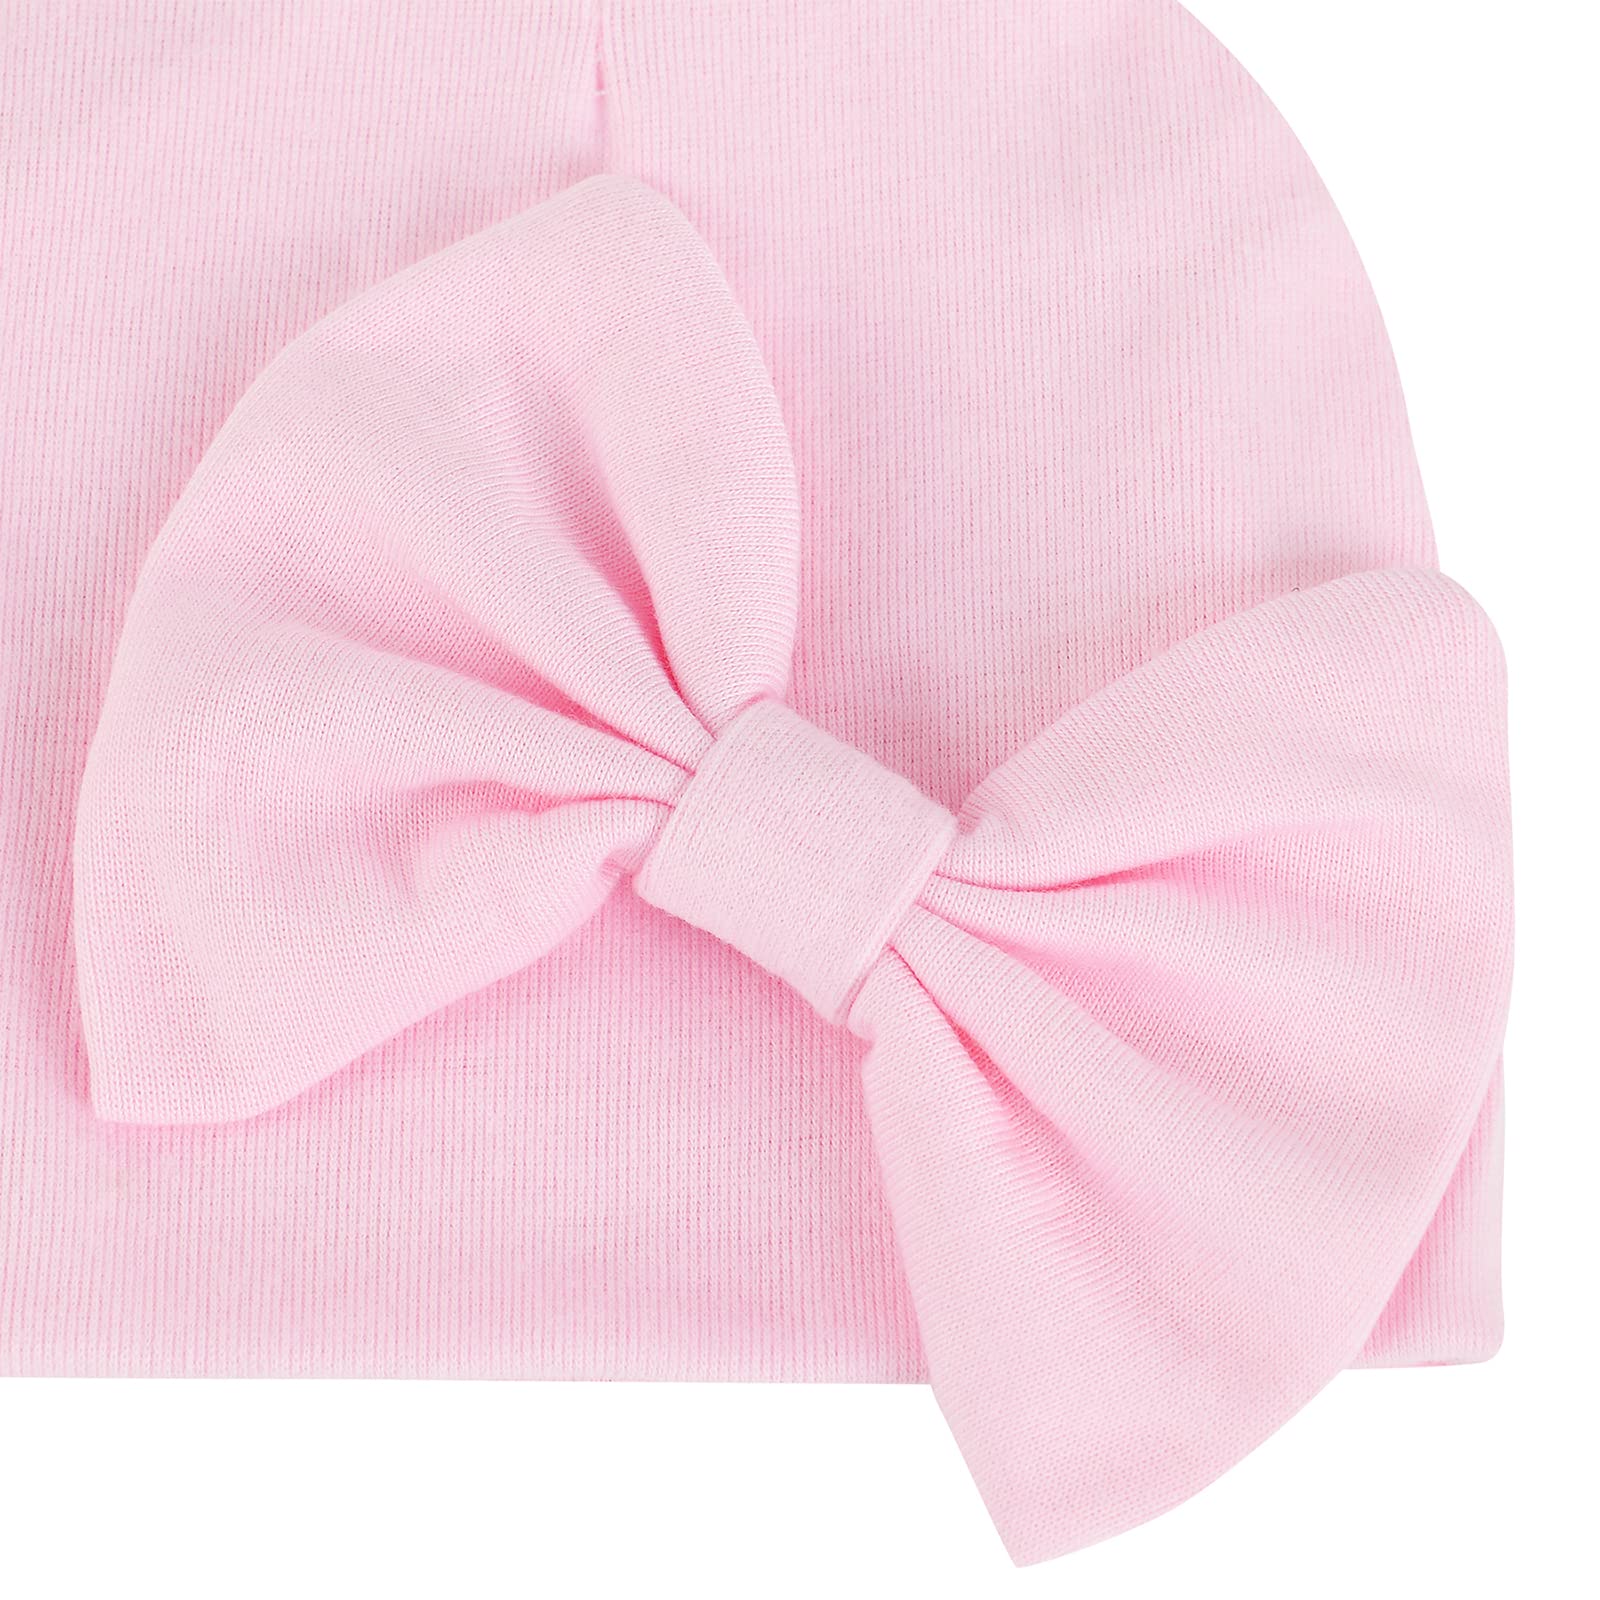 Mittens and Caps for Newborn Baby Girls Set Hospital Hat Beanie Infant Hats with Bow for 0-6 Months Deep Pink & White & Gray & Black 0-3 Months